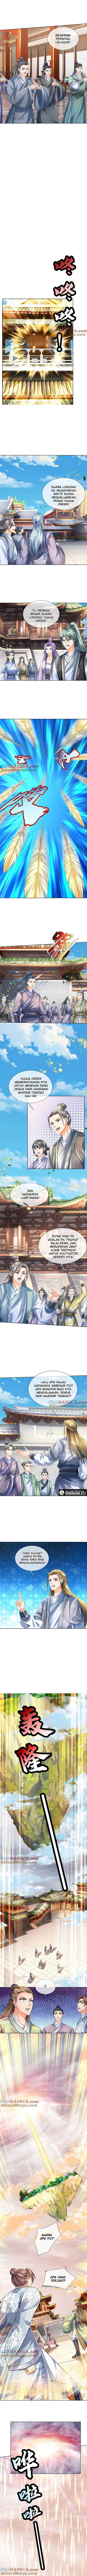 Star Sign In To Supreme Dantian Chapter 275